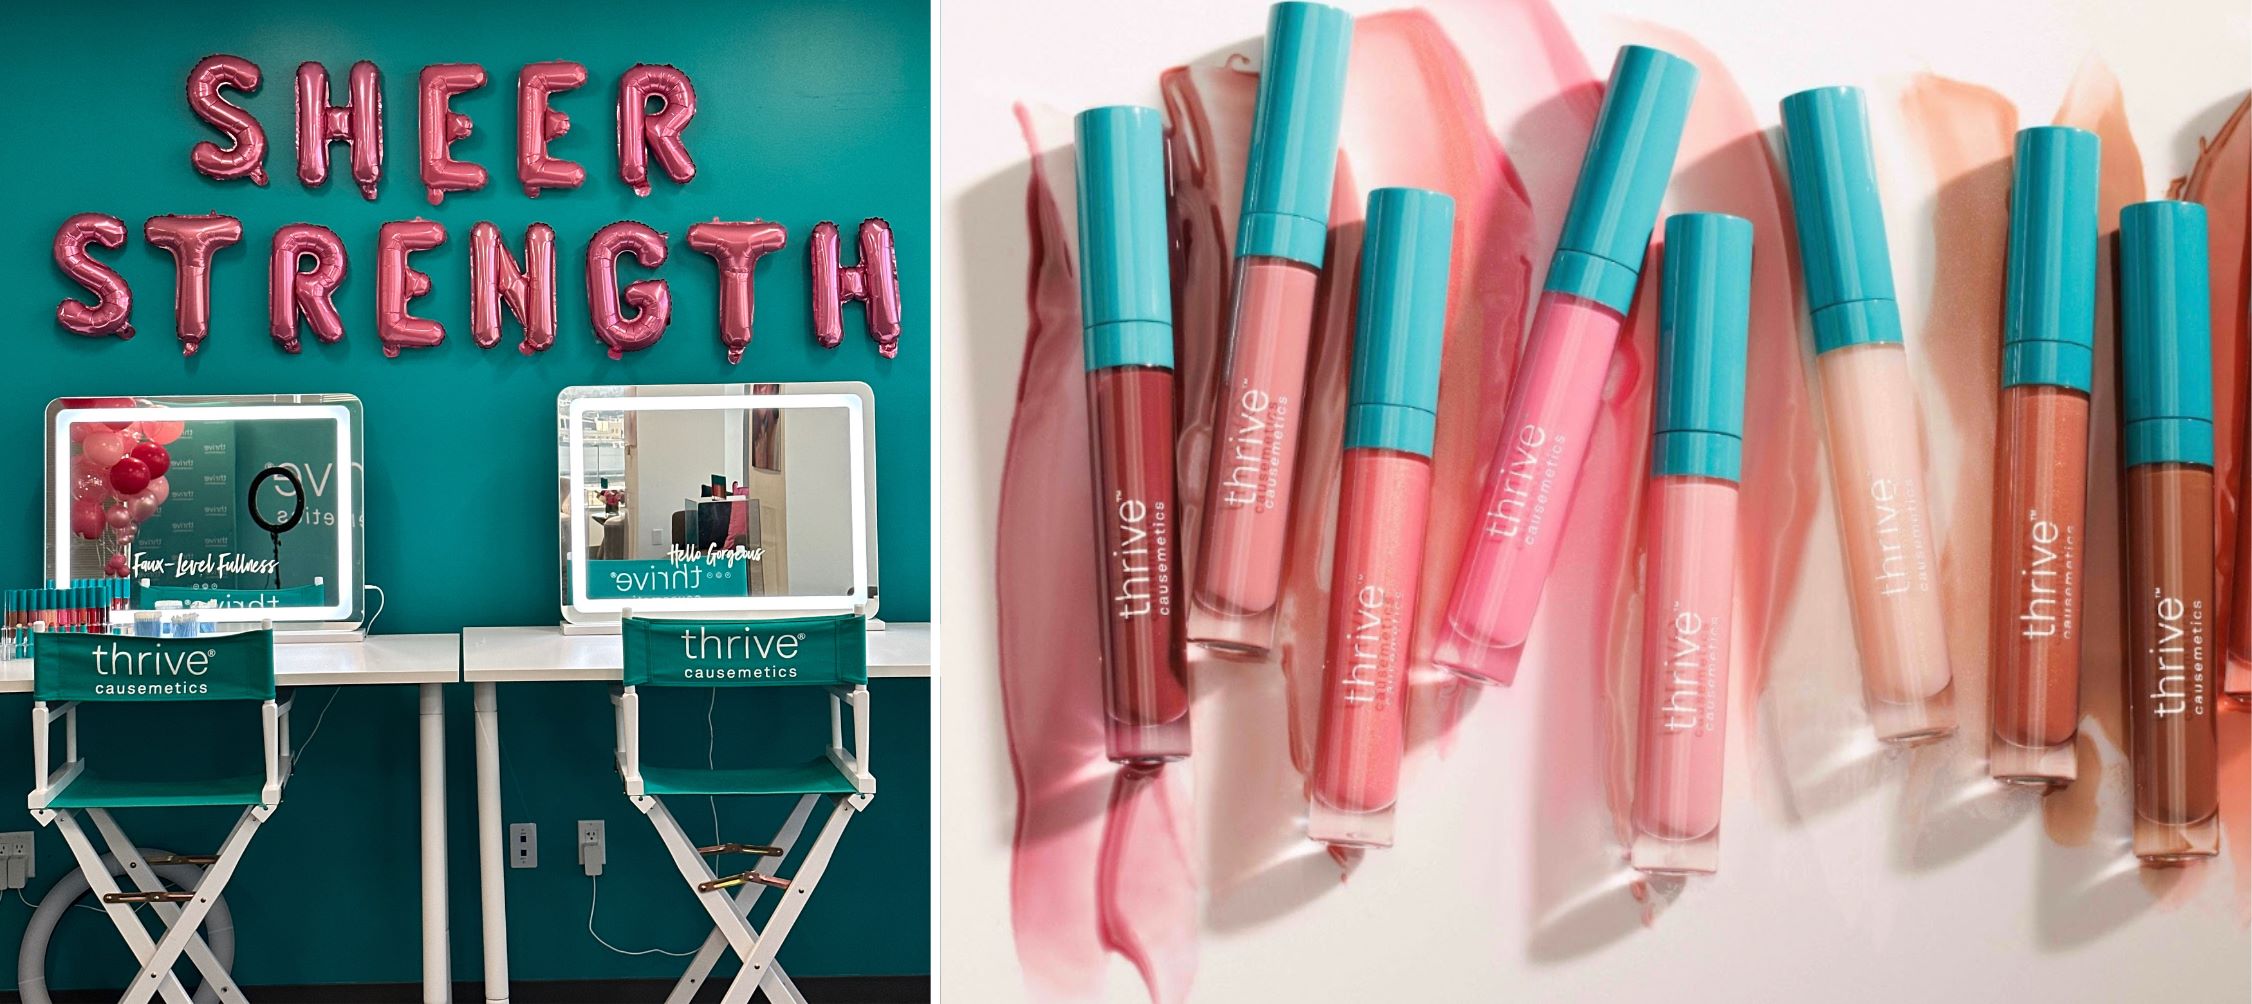 Thrive Causemetics Celebrates the Launch of the Sheer Strength Lip Plumping Peptide Gloss with a Special Self-Defense Event